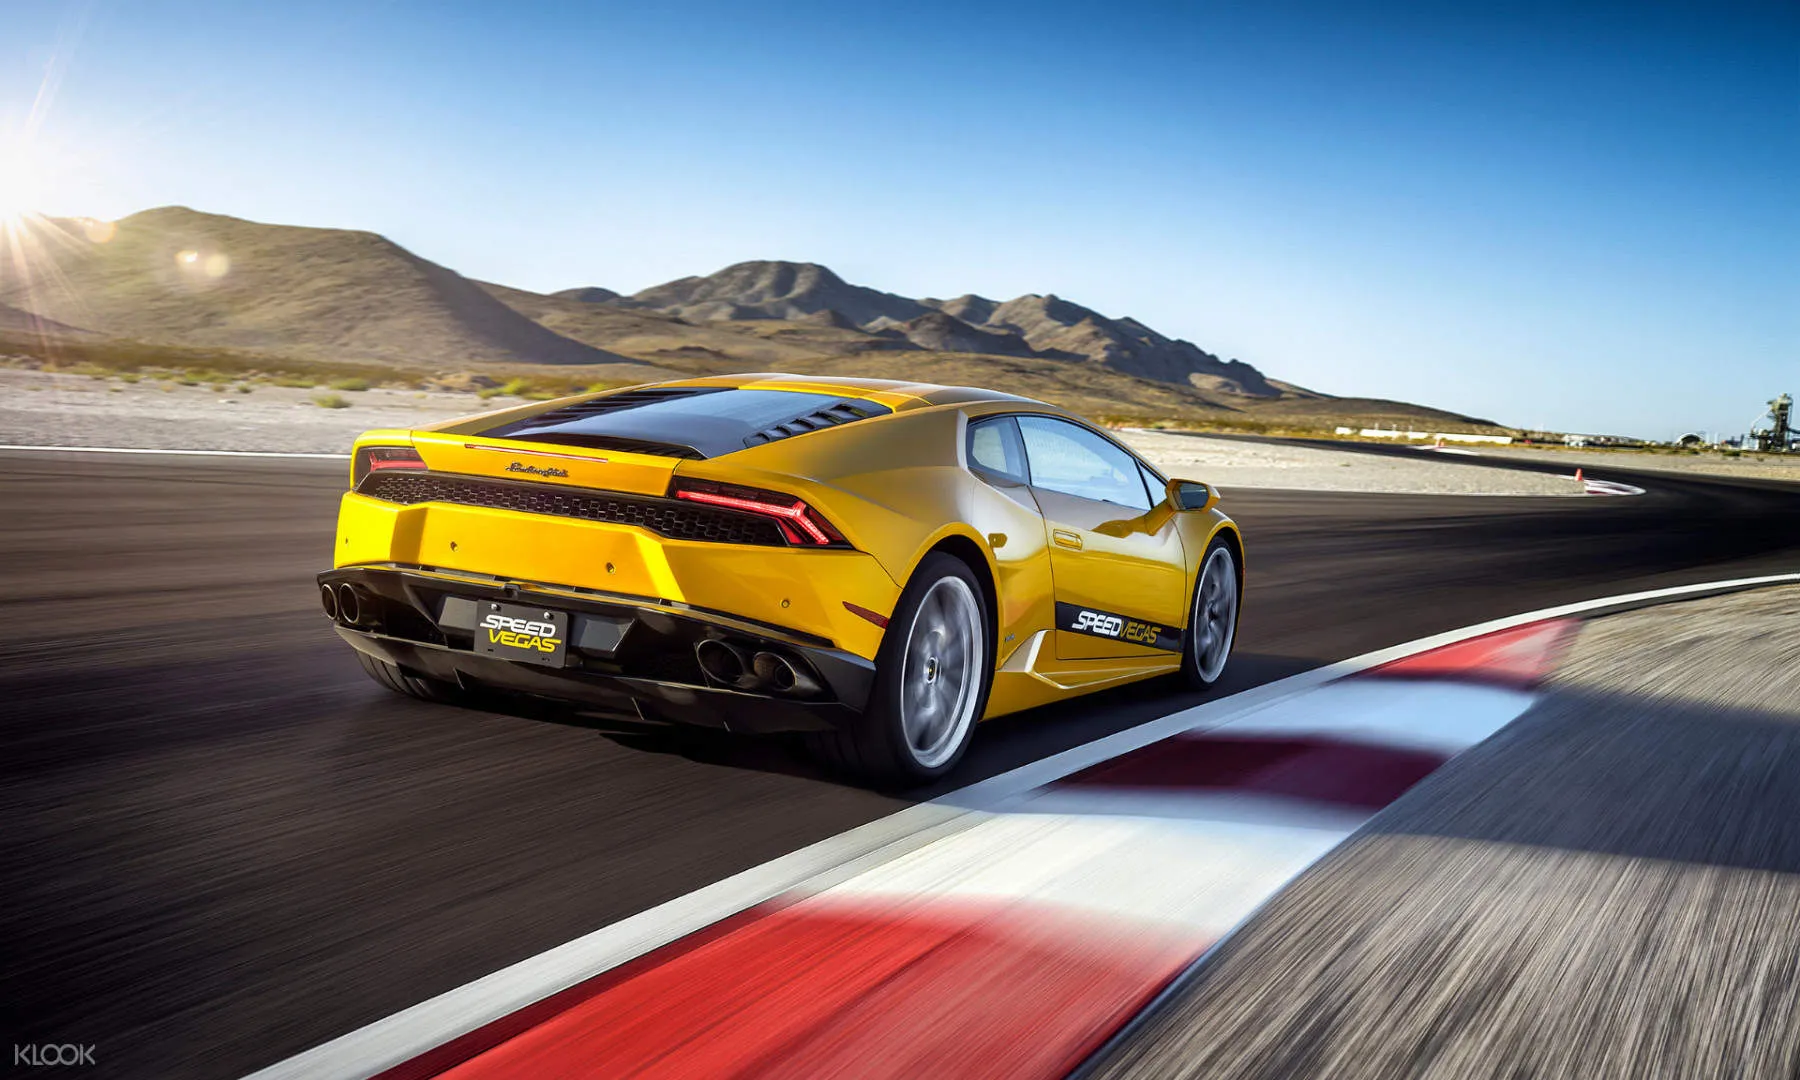 Lamborghini driving on a track in Las Vegas on a supercar track day